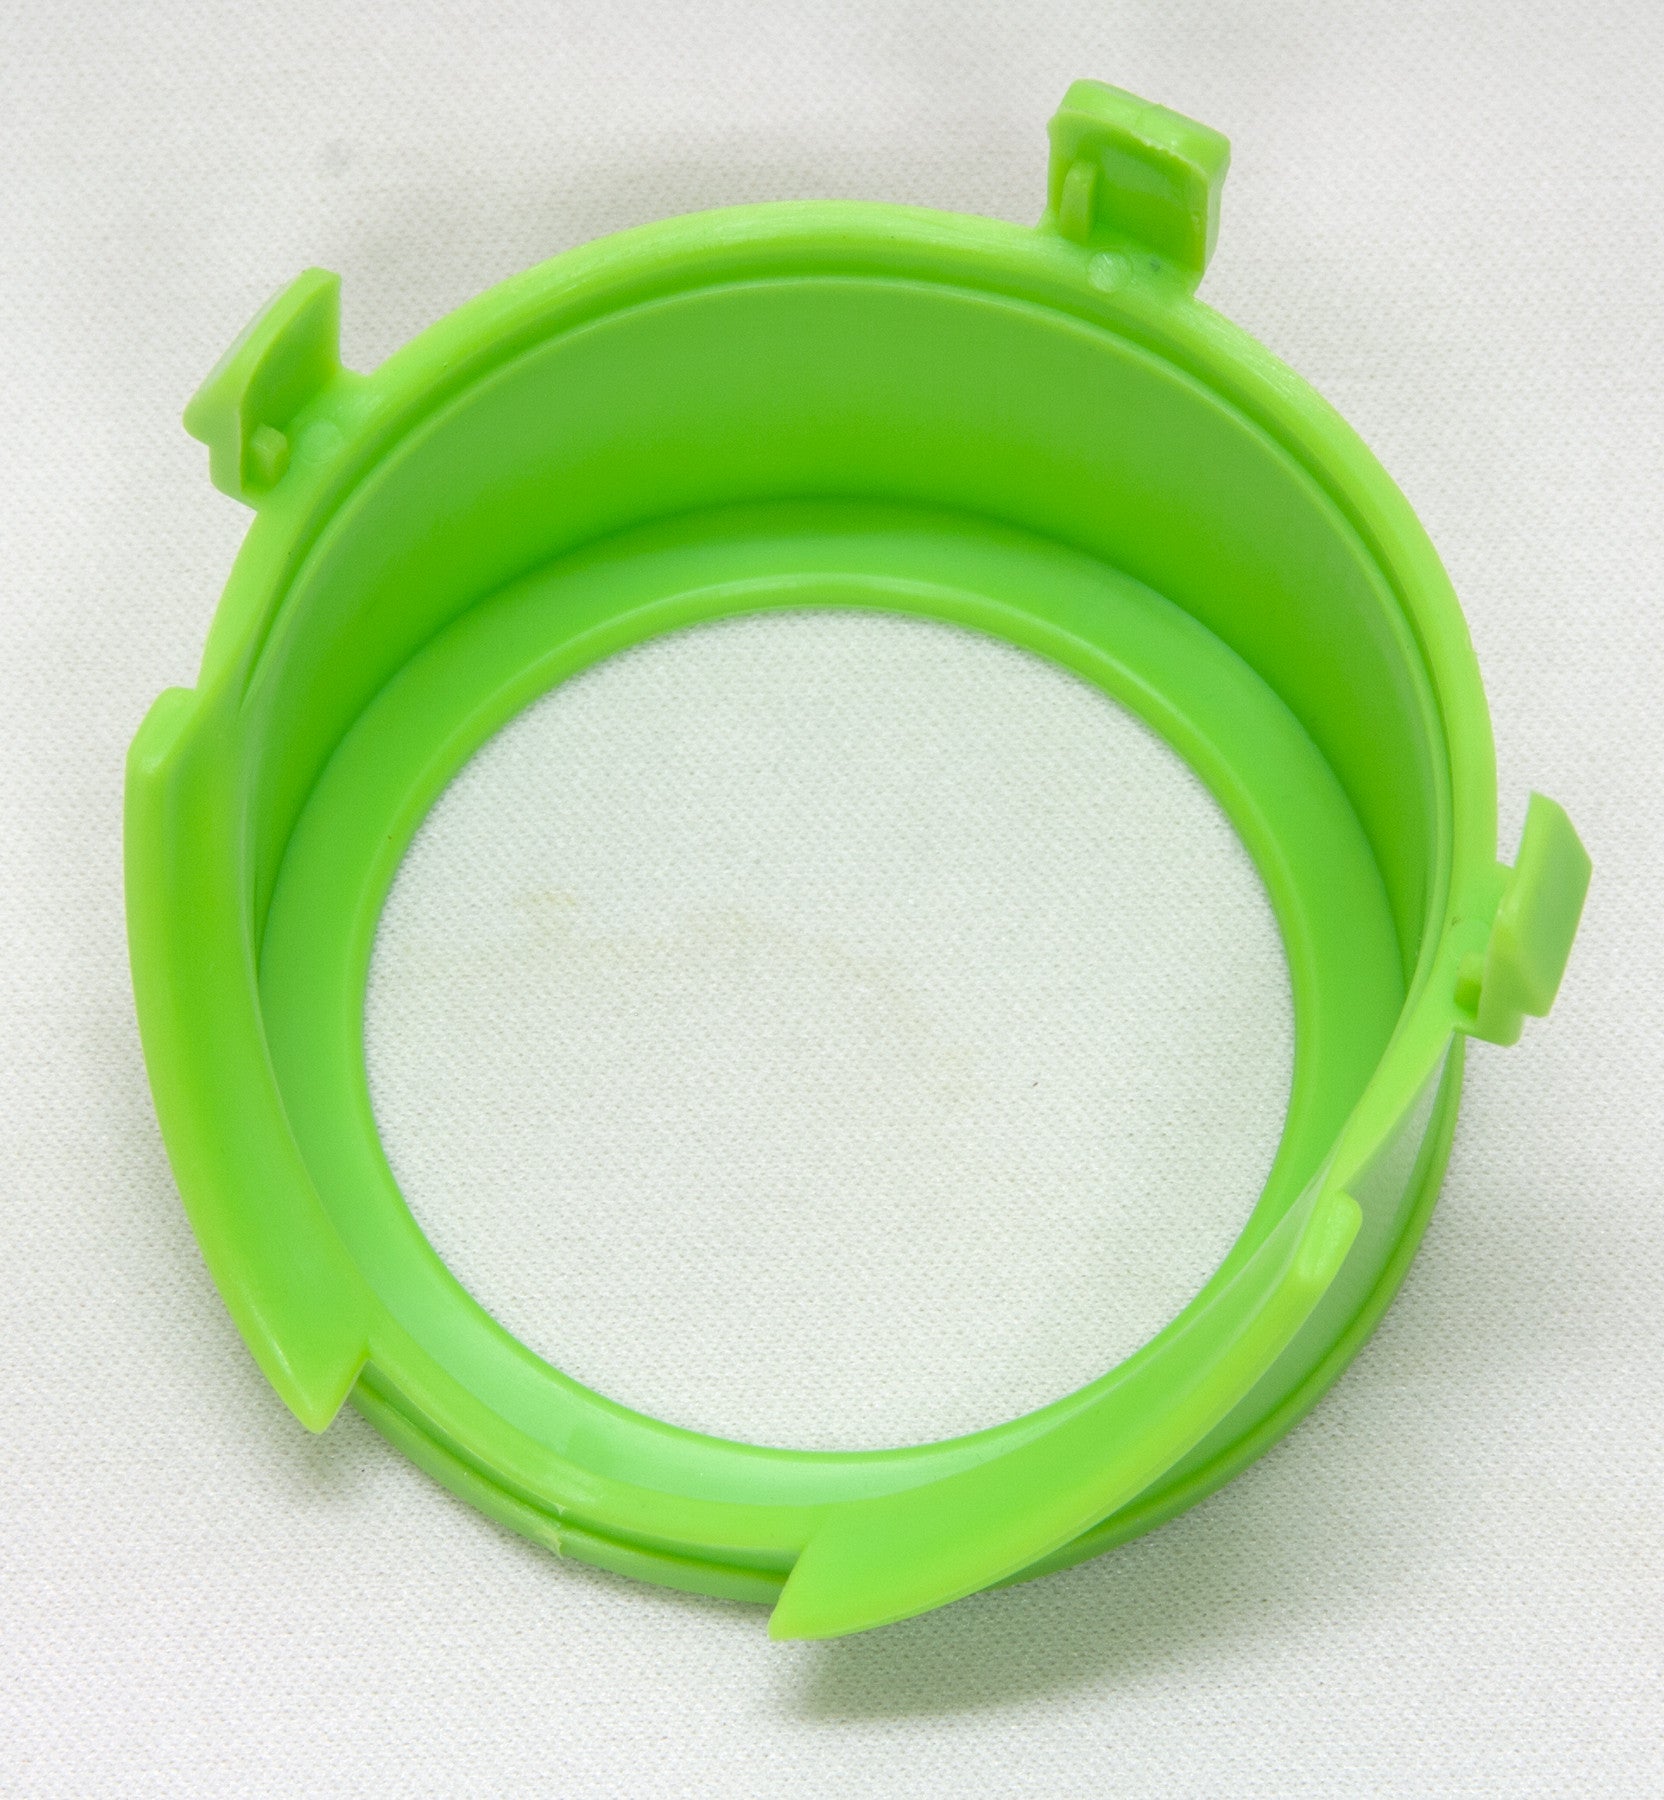 Small Spiral Slide Support # 300036963